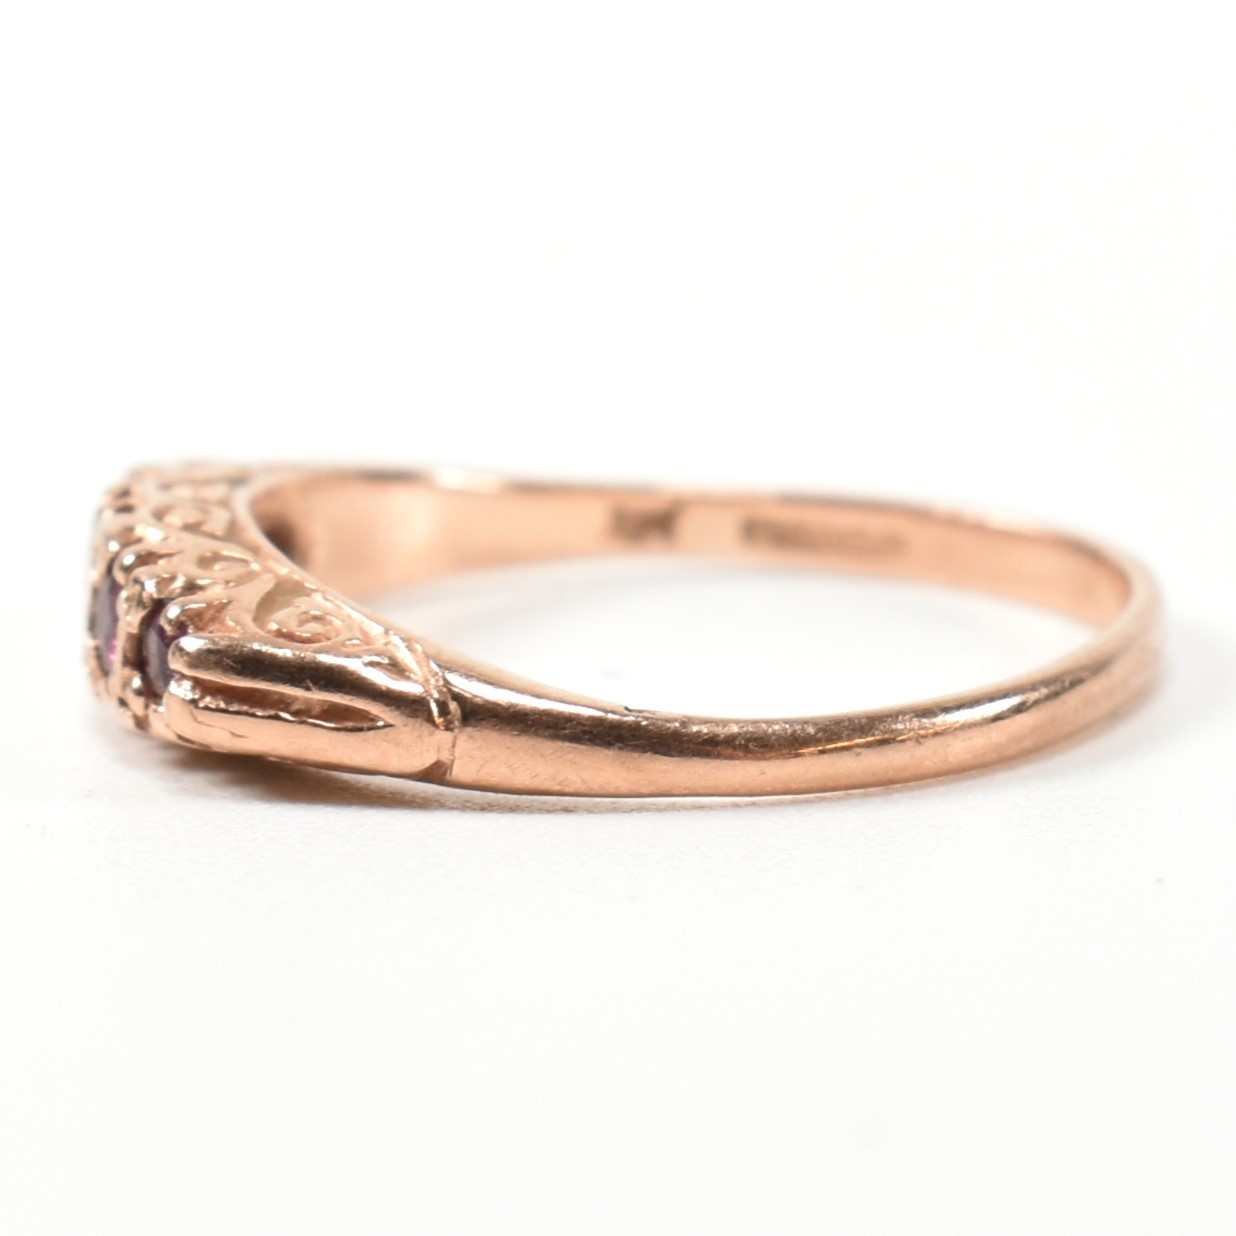 HALLMARKED 9CT ROSE GOLD & RUBY FIVE STONE GYPSY RING - Image 4 of 9